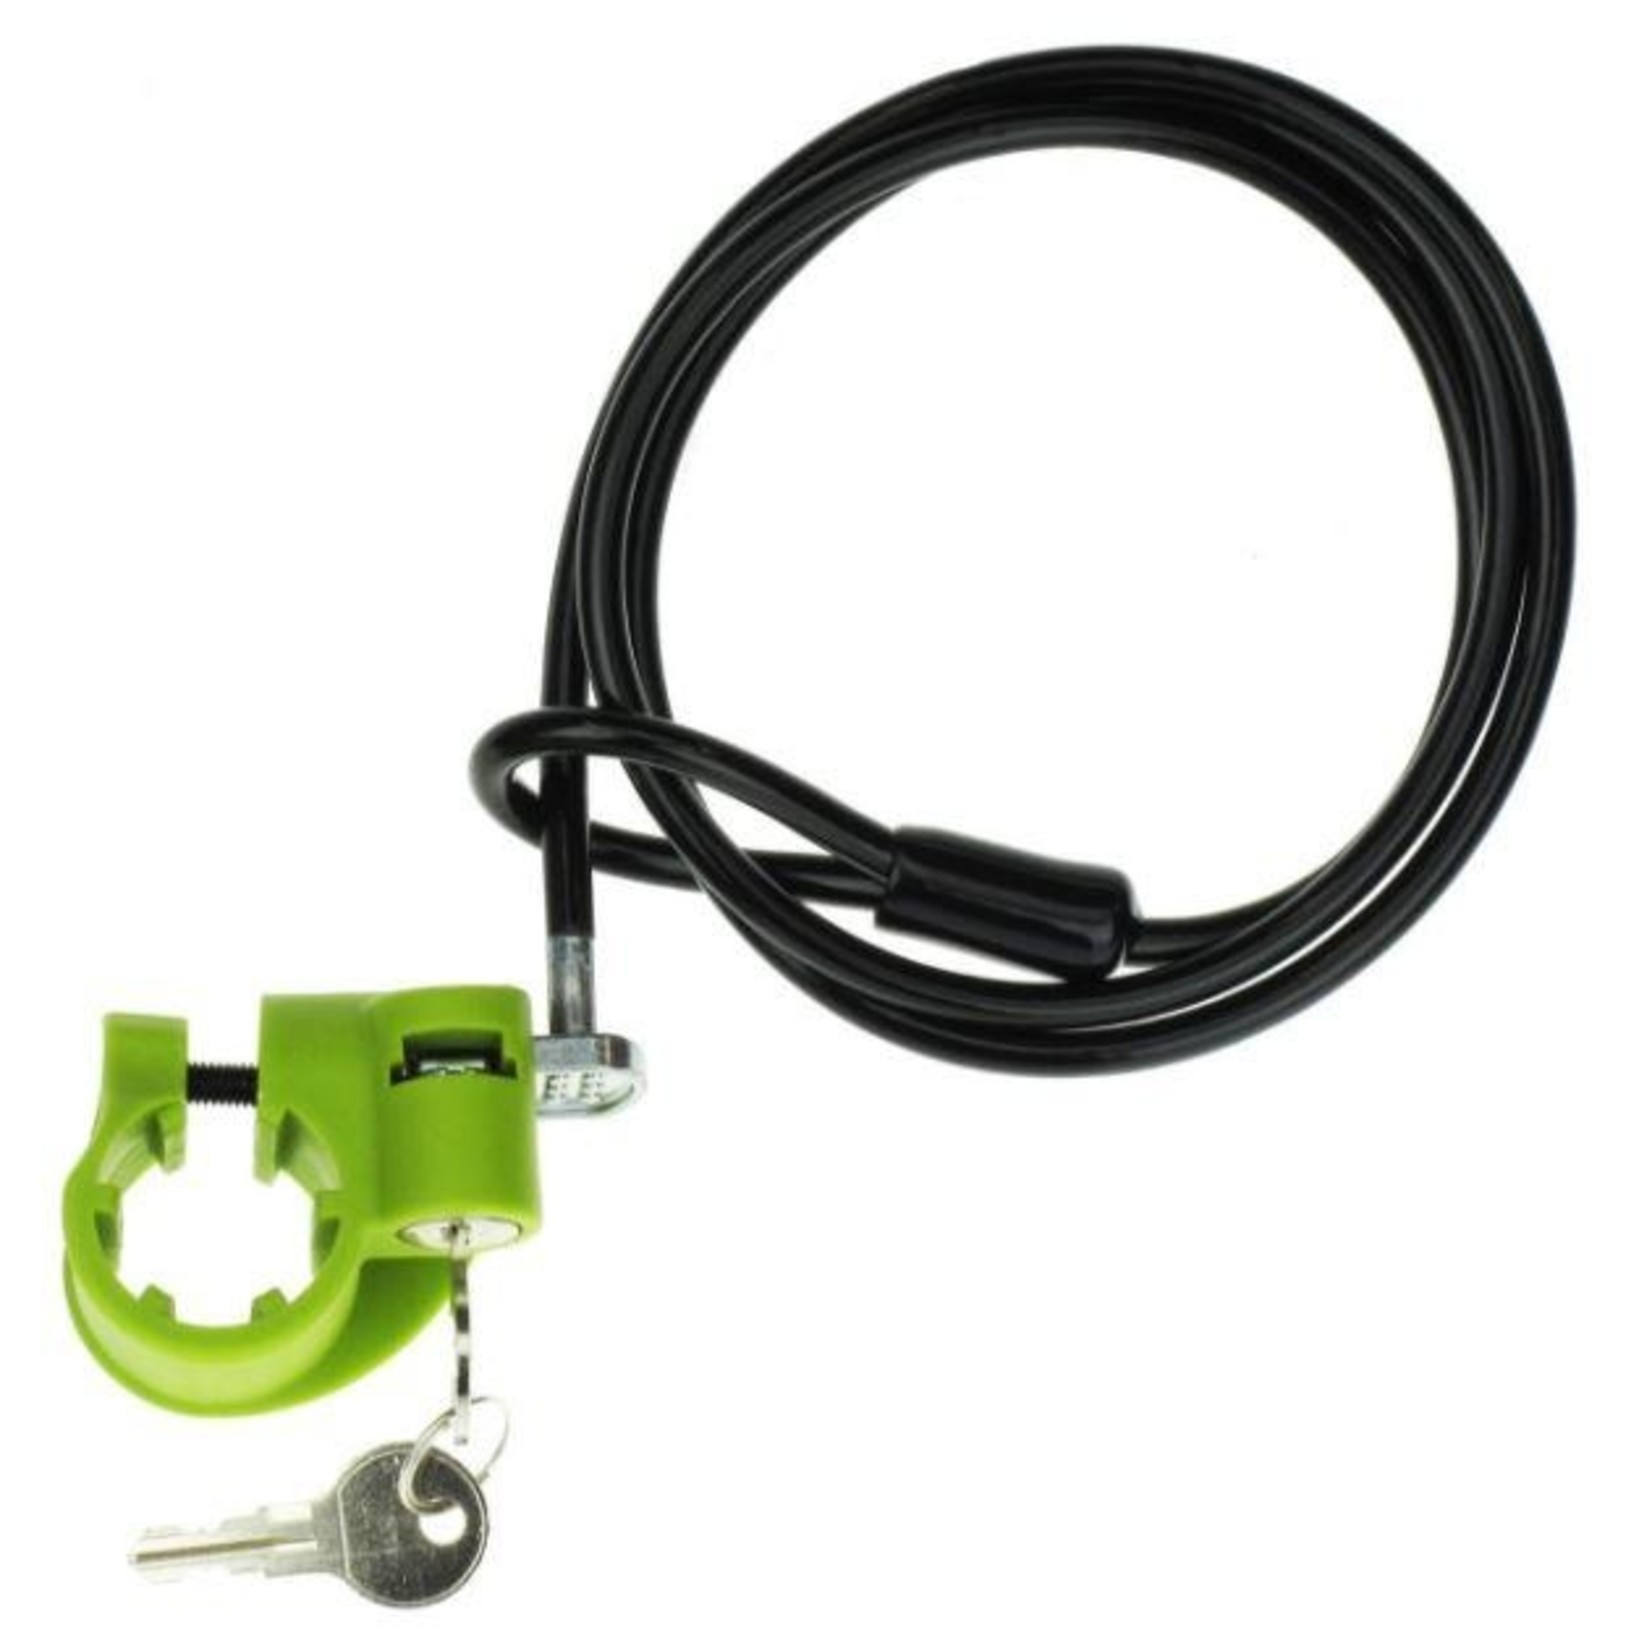 BuzzRack Buzz Rack BR-CABLE-1- Loop Cable/Clamp Lock 980mm Black/Green